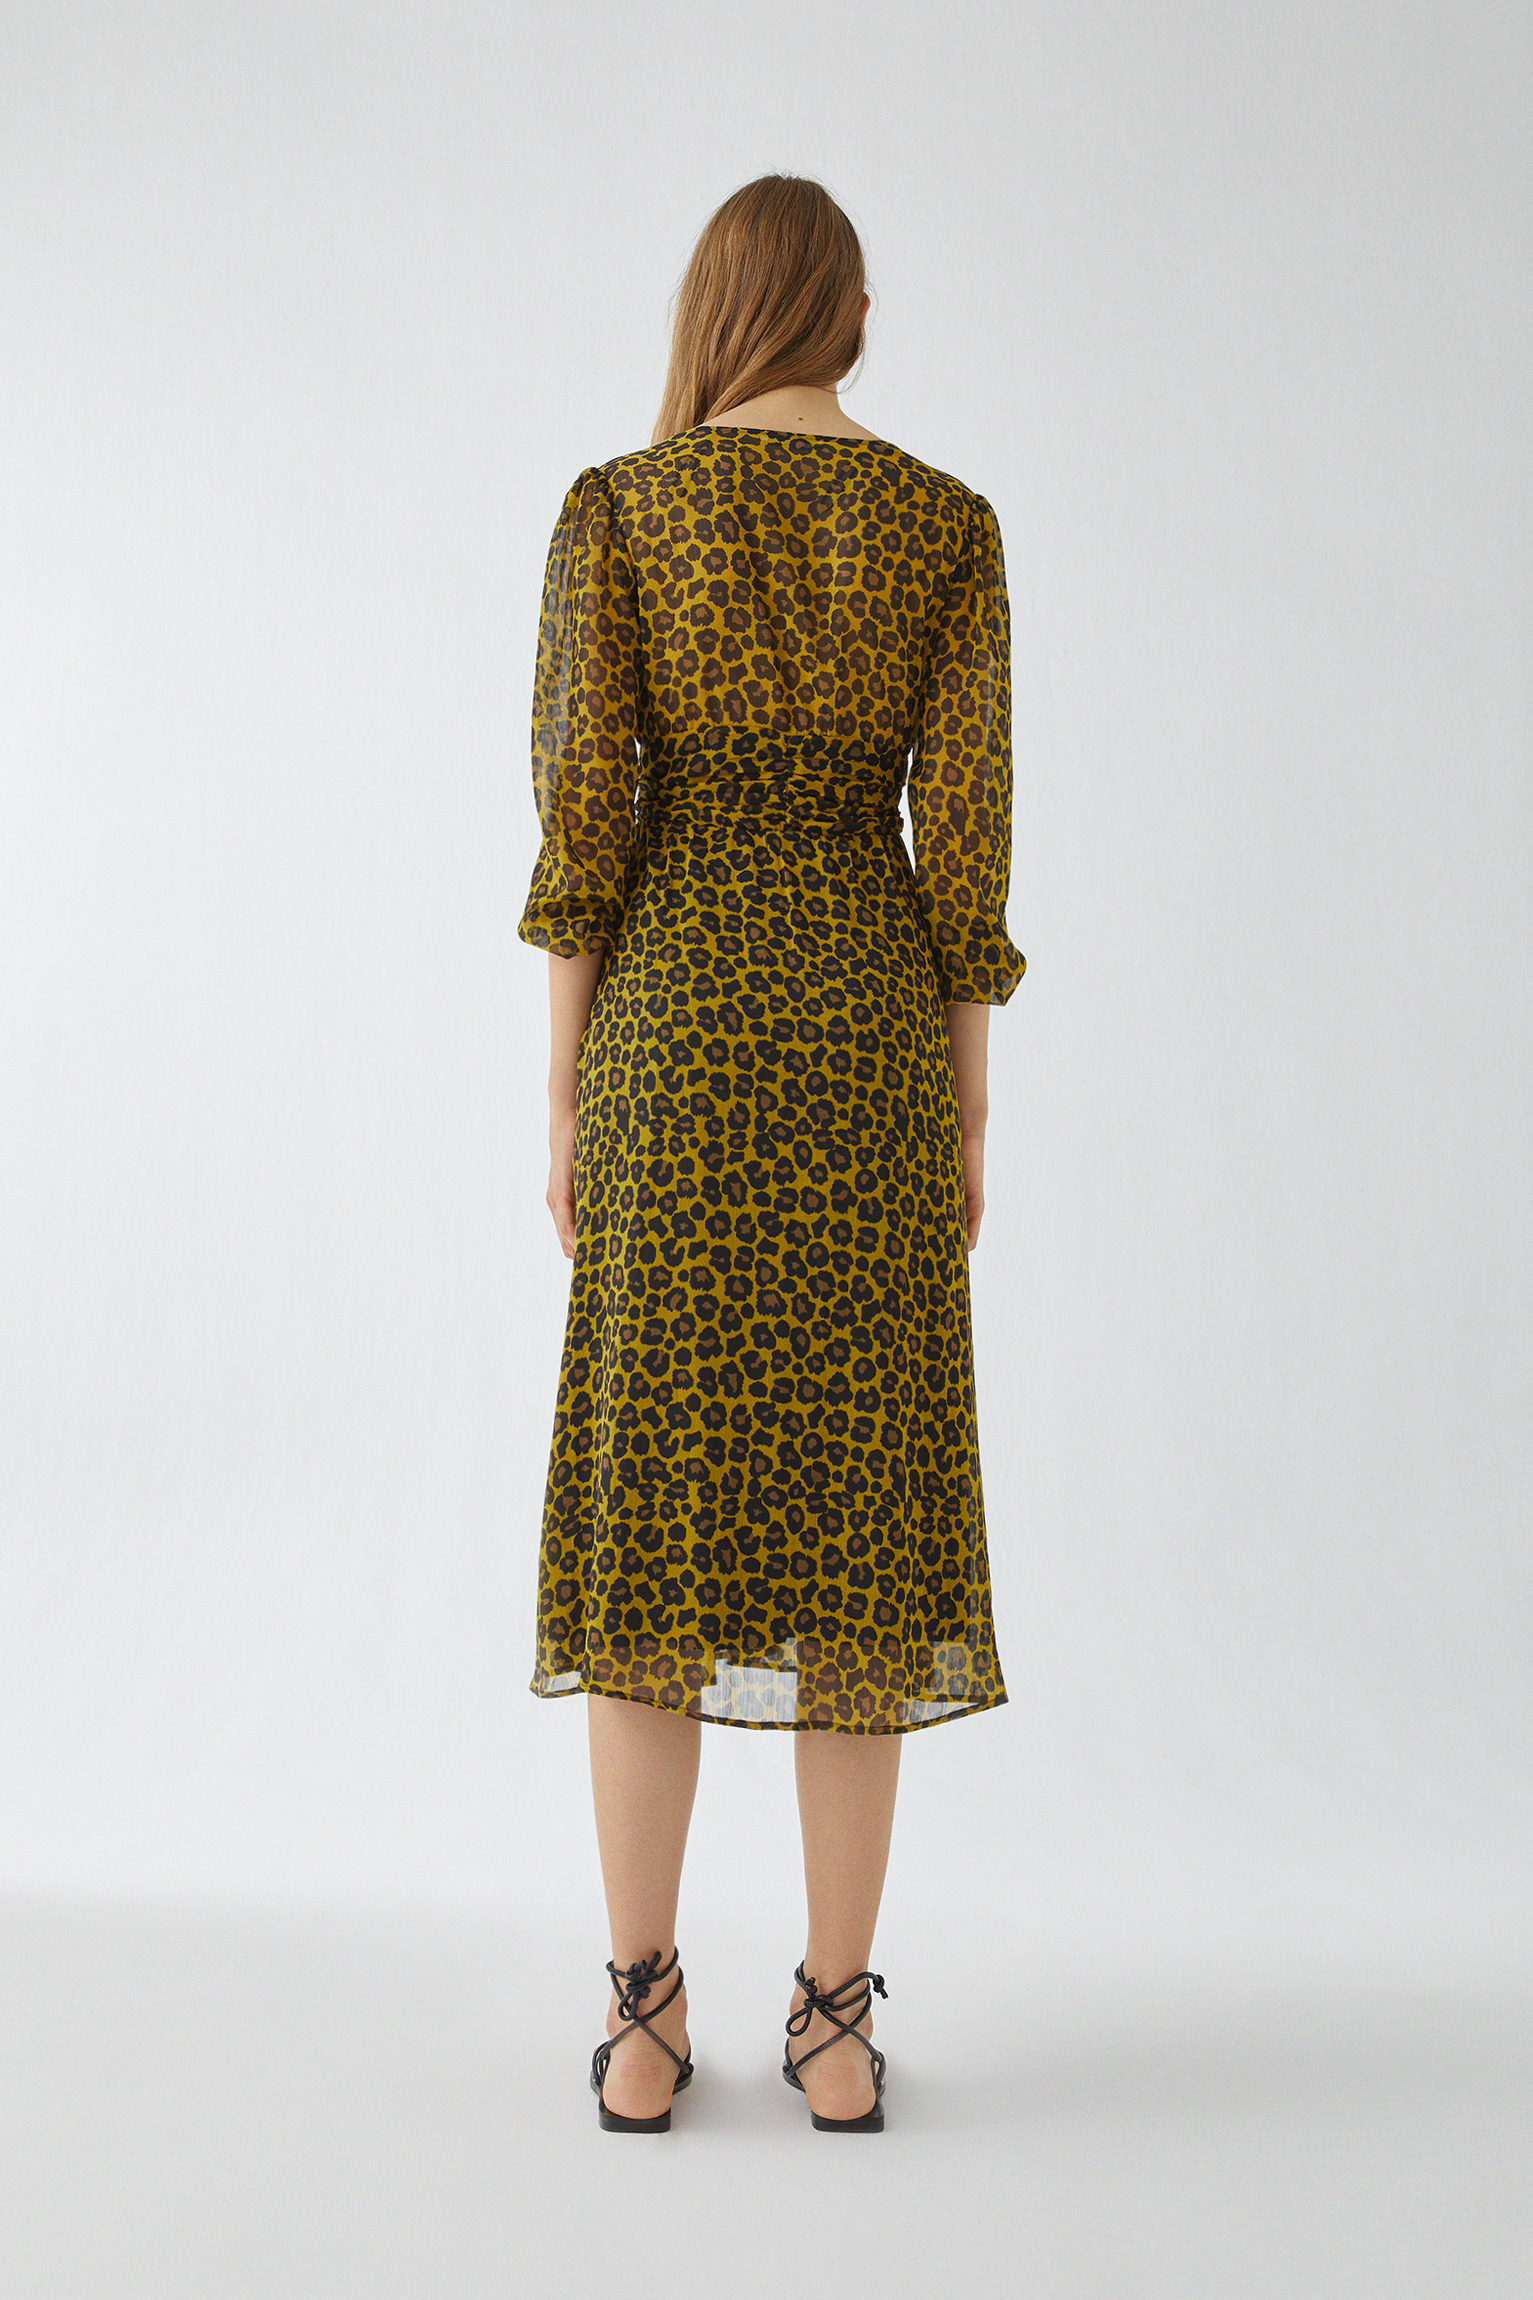 pull and bear leopard dress